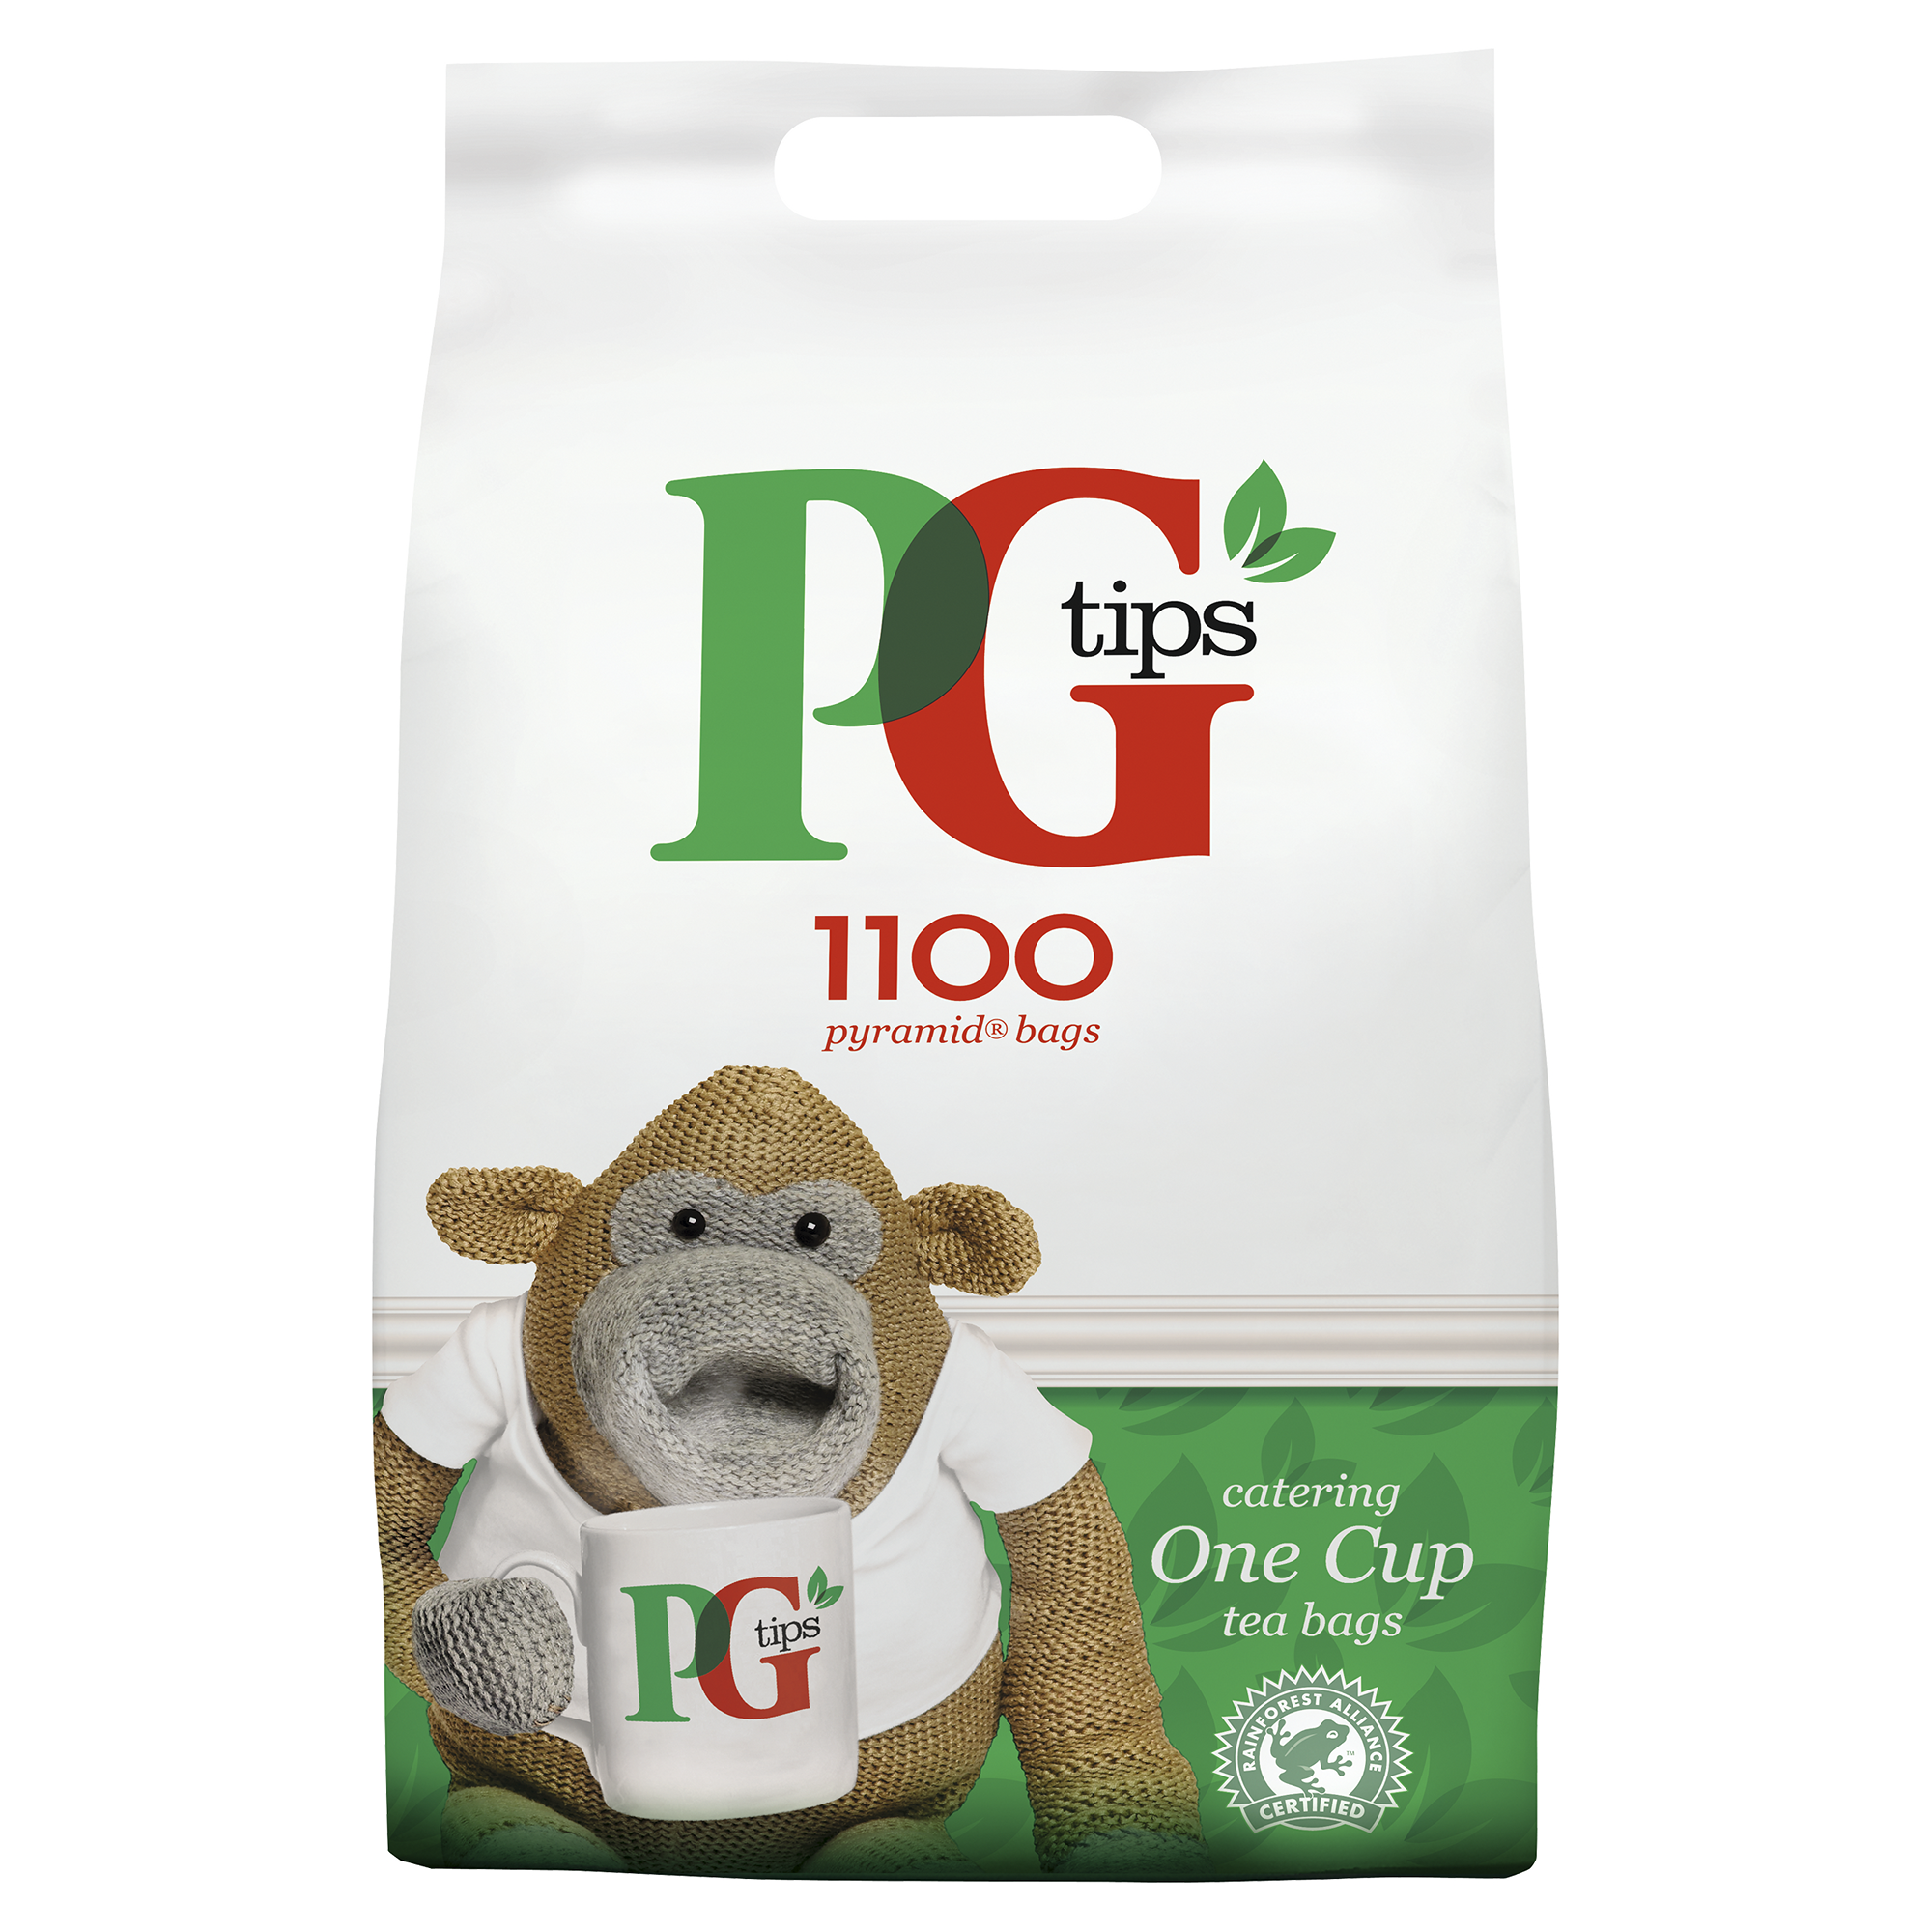 PG Tips Catering Tea Bags - Pack of 1100